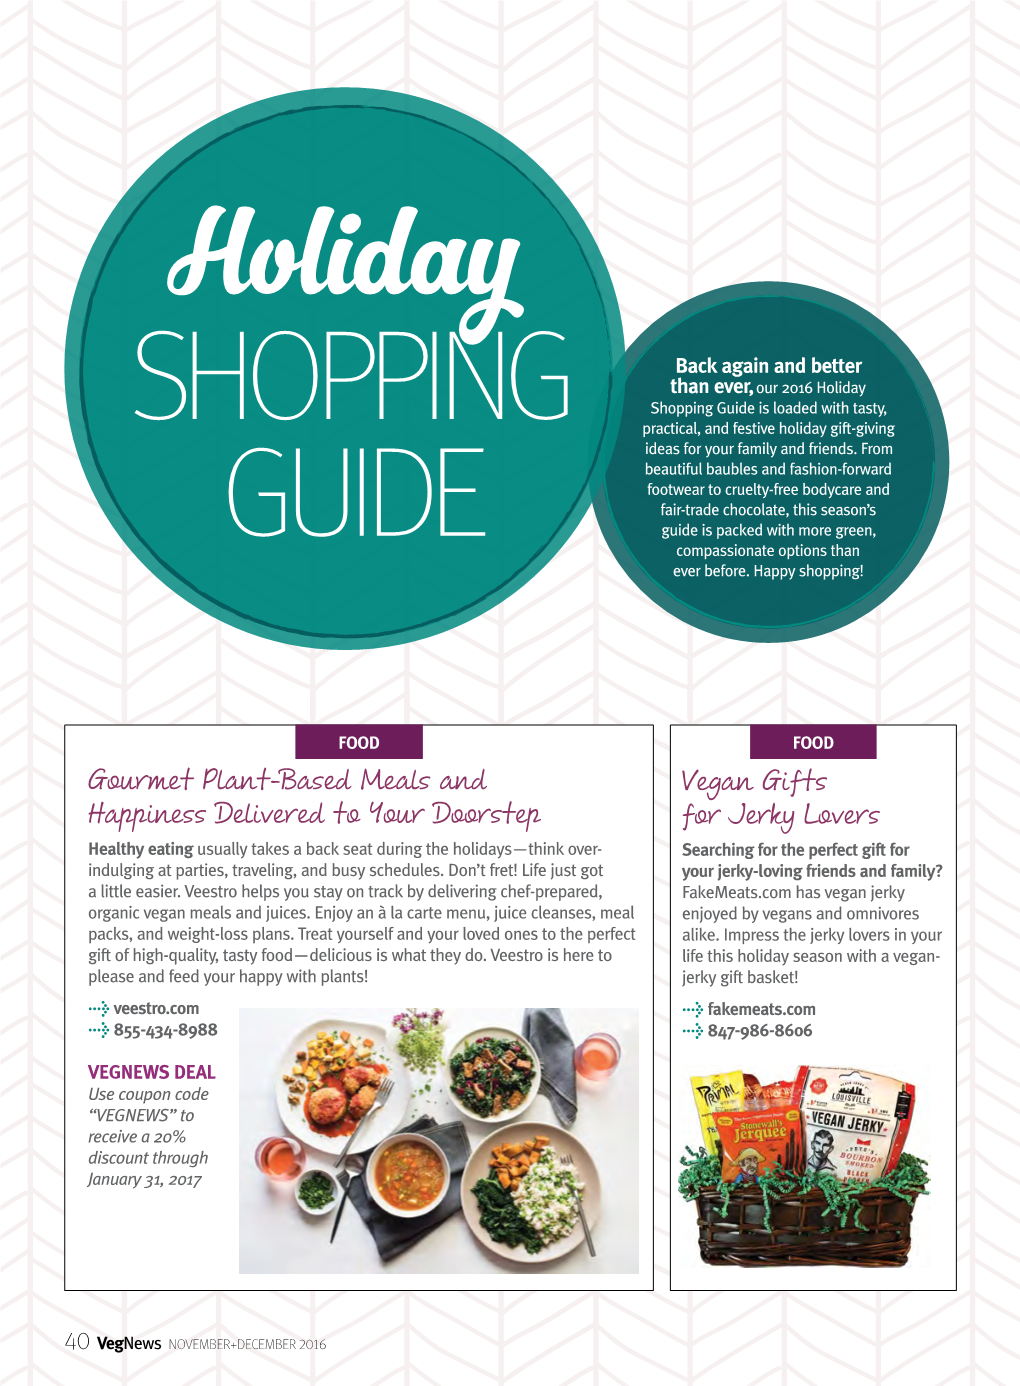 Download the Vegnews Holiday Gift Guide Here!